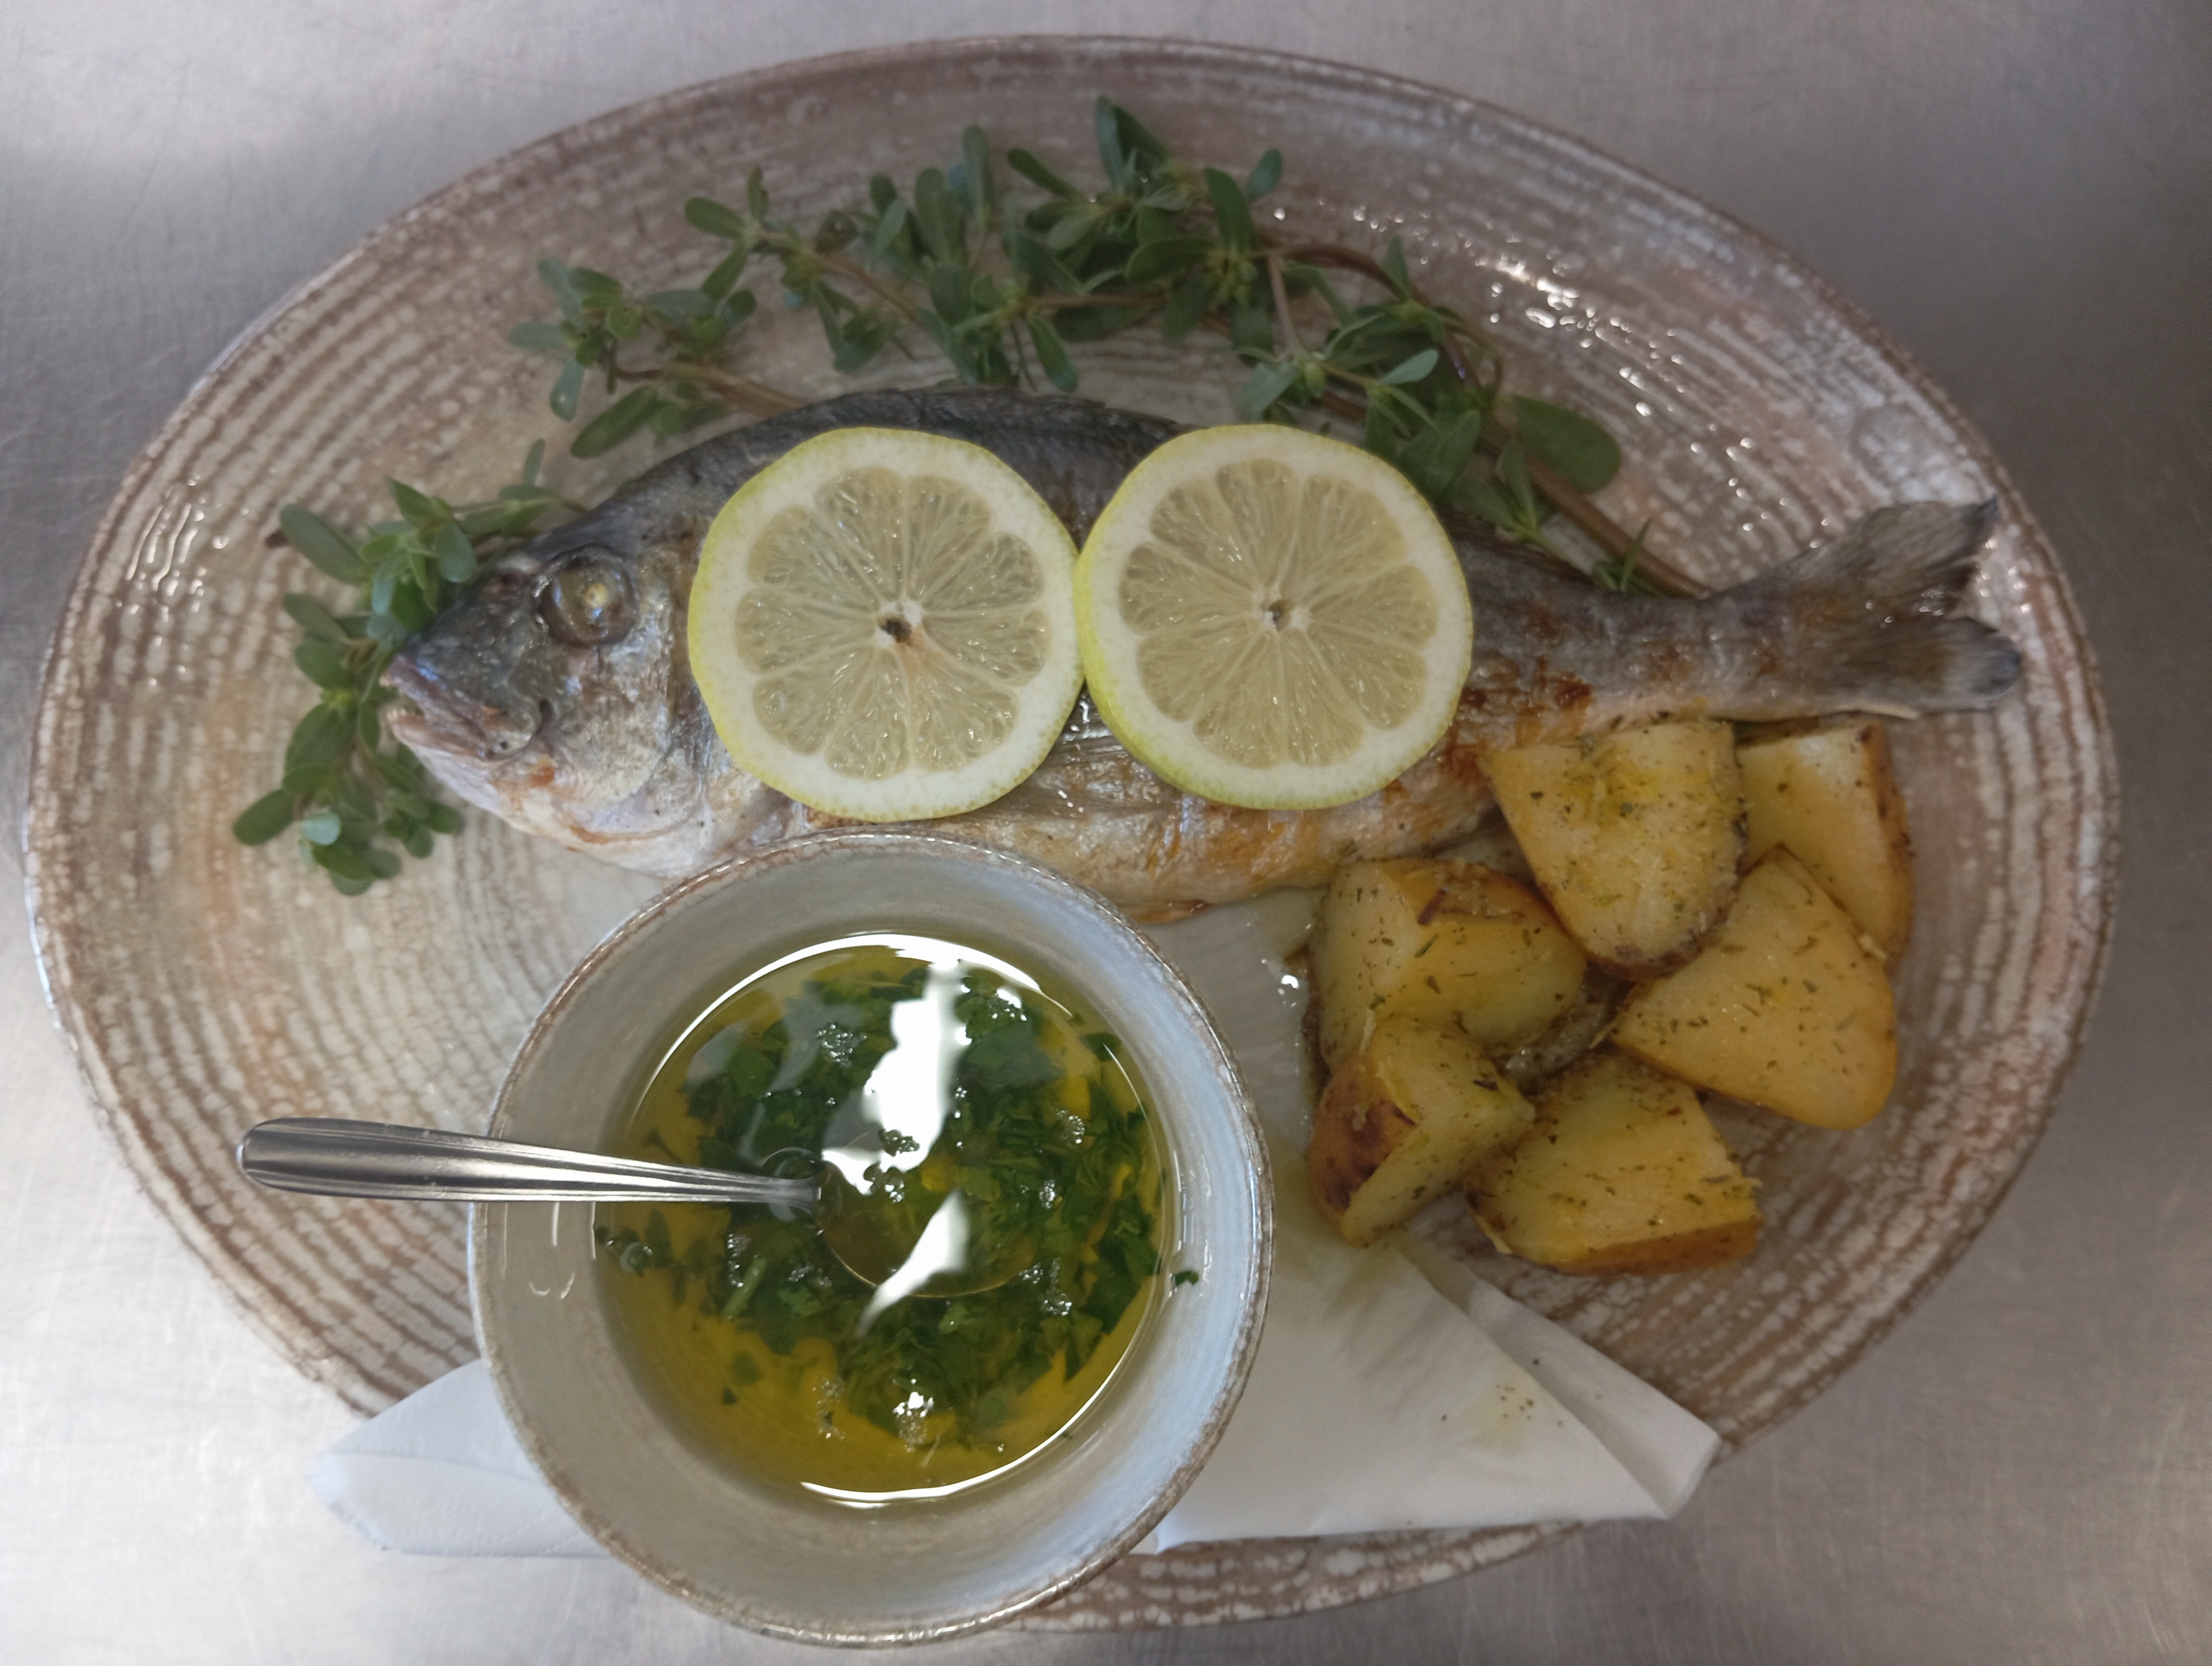 Grilled Seabream